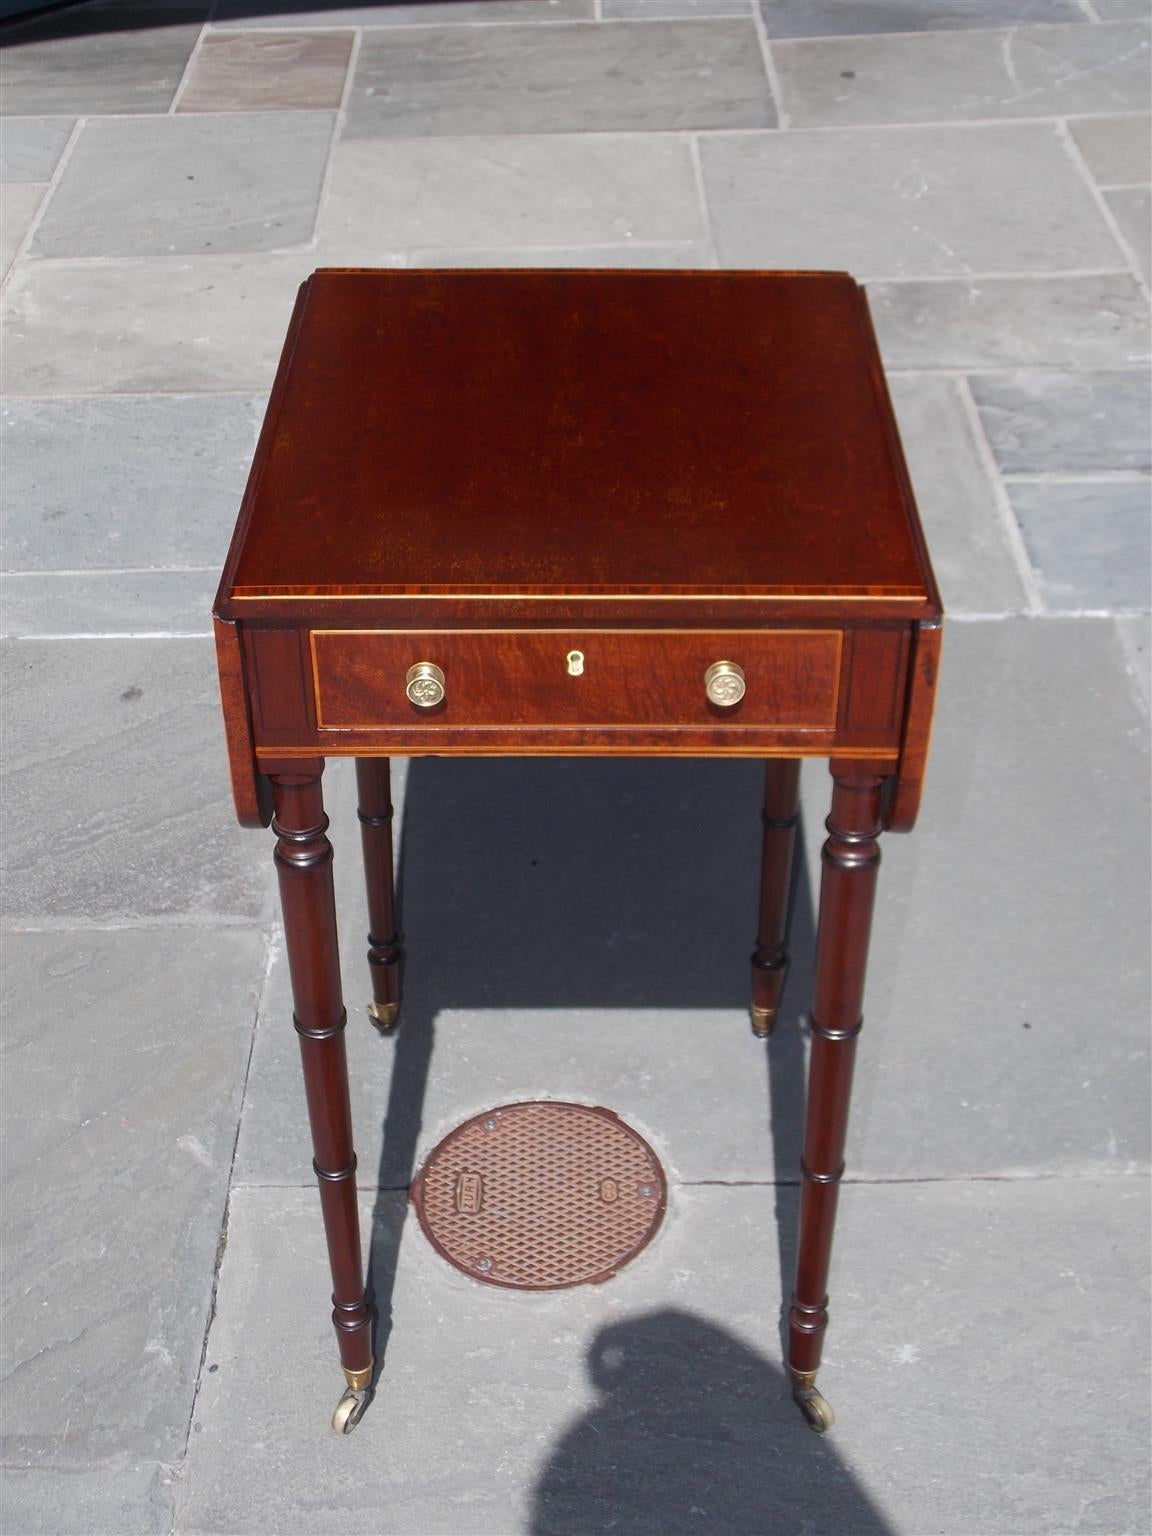 English plumb pudding mahogany drop-leaf table with tulip wood cross banding, original brasses and terminating on turned ringed legs, Late 18th century. Table is 16